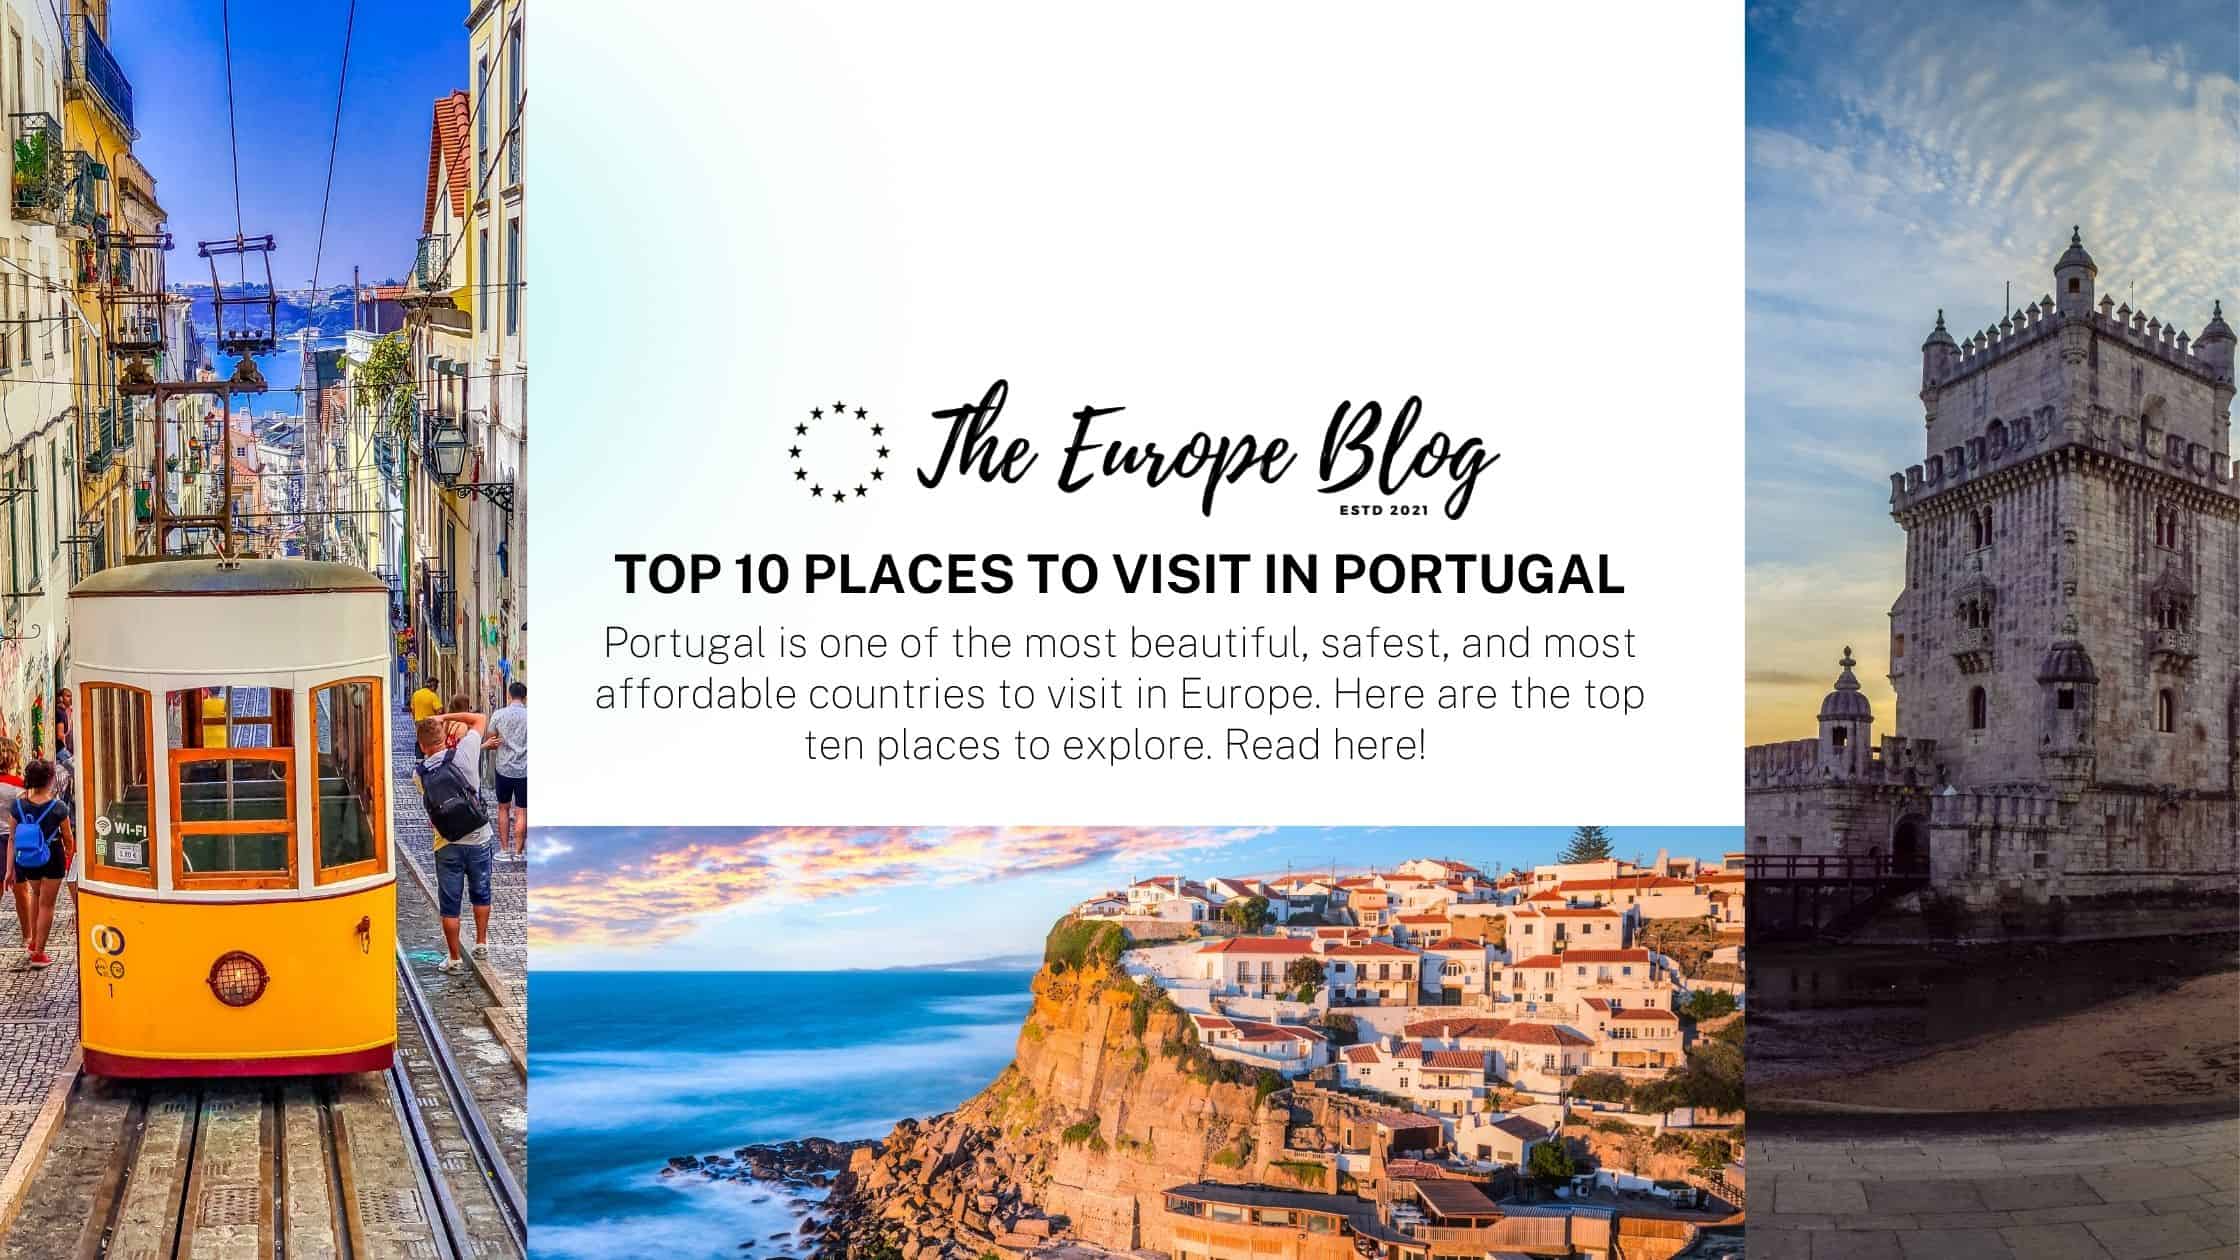 Top 10 places to visit in Portugal